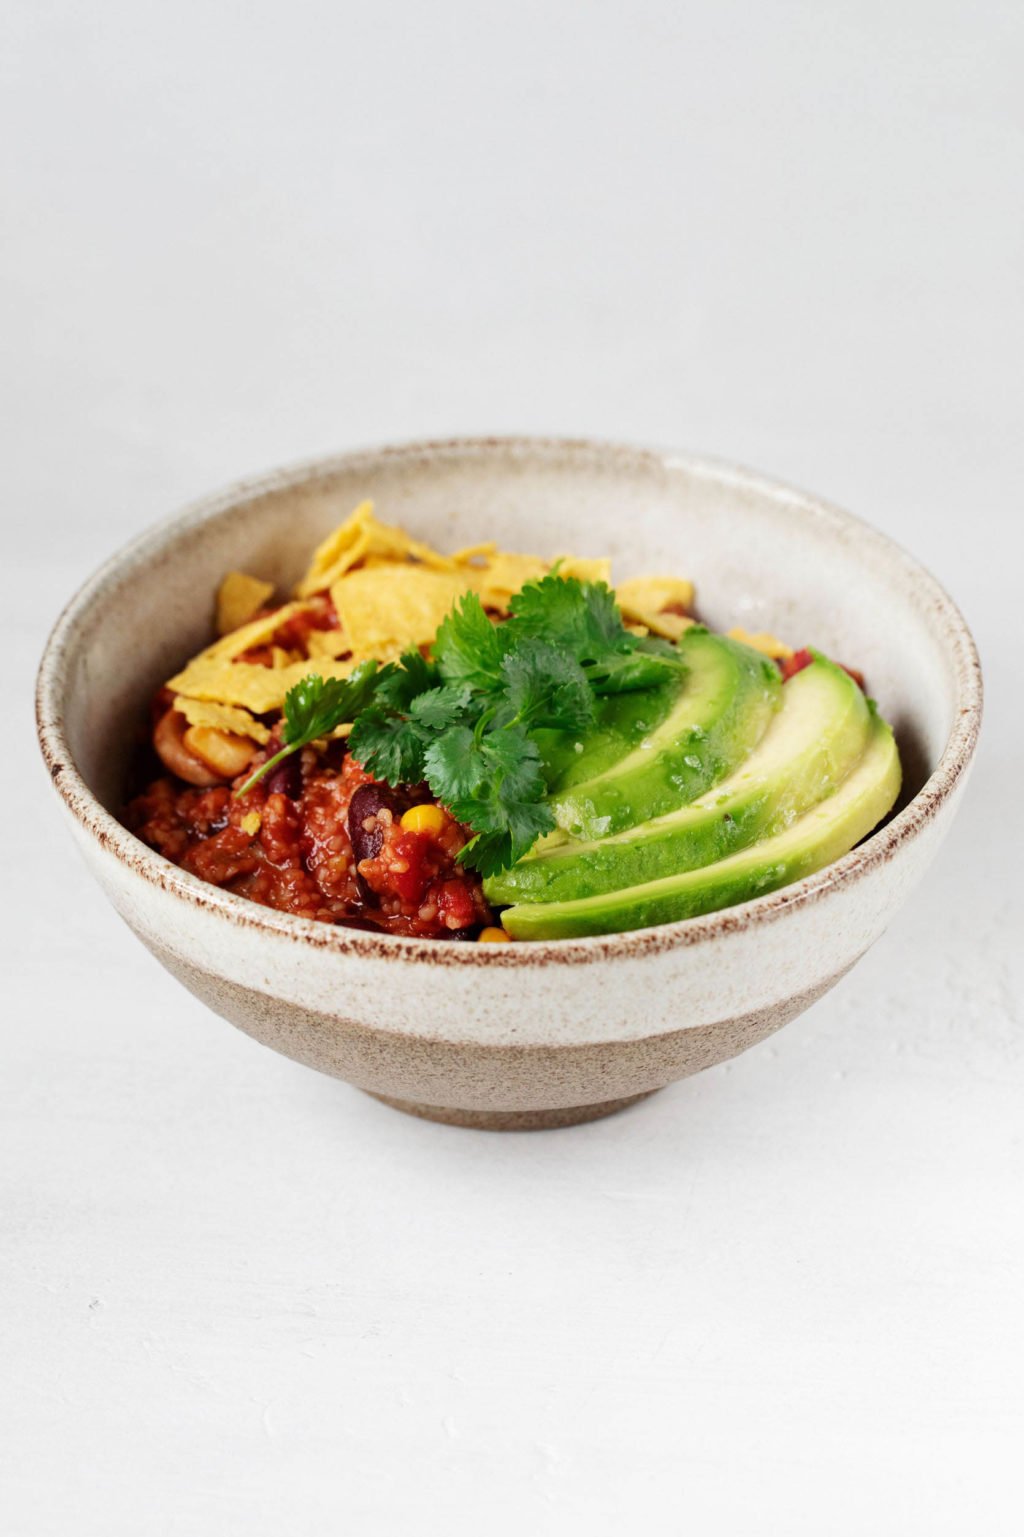 An angled photograph of a cream colored and light brown bowl. It's filled with a bulgur and bean chili that has been garnished with avocado slices, corn chips, and green herbs.